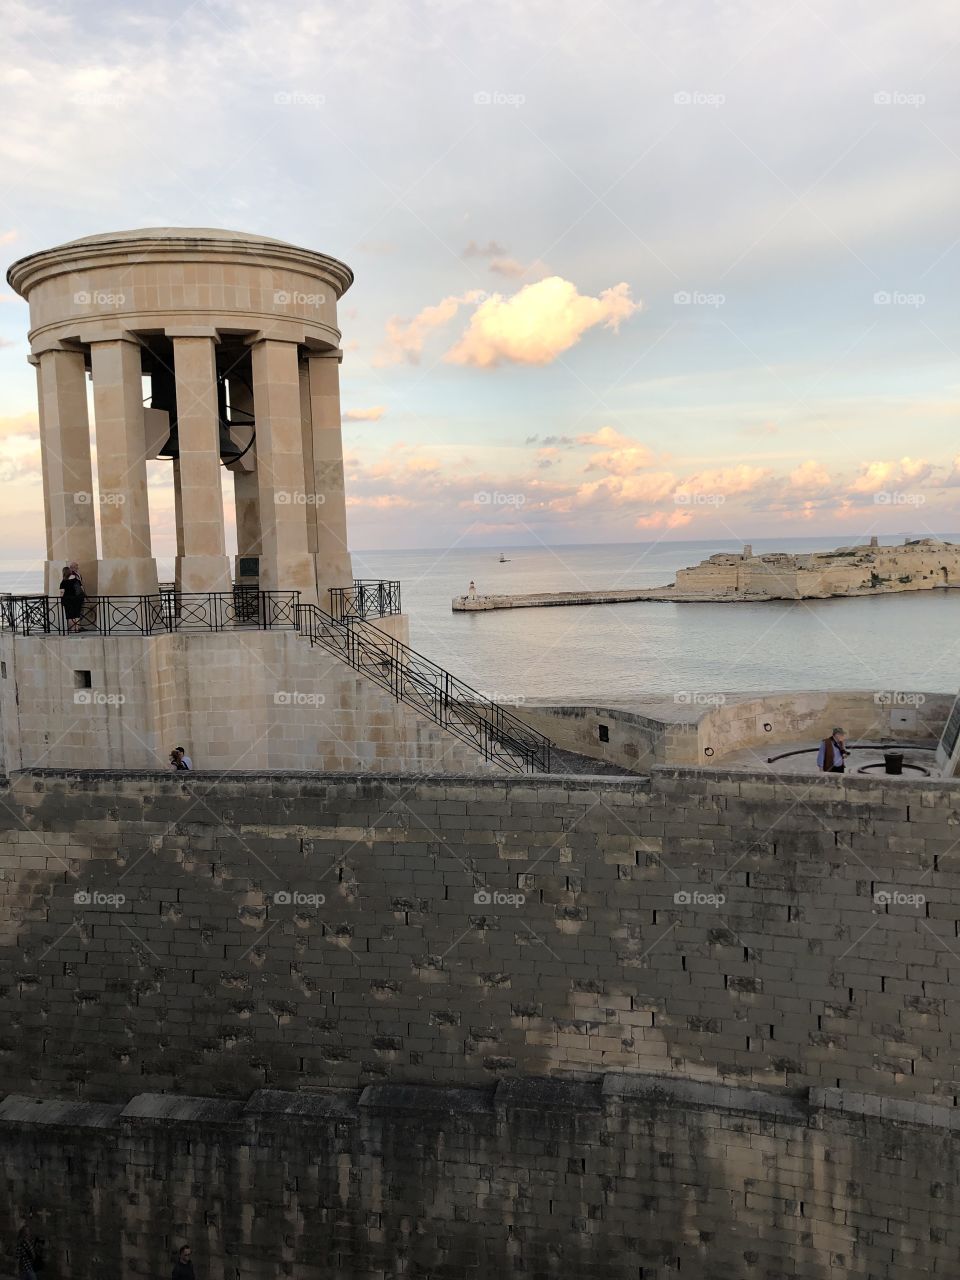 A fantastic view of the Siege Bell War Memorial in Valletta, Malta. This stunning piece of architecture lies just across from the Lower Barrakka Gardens 